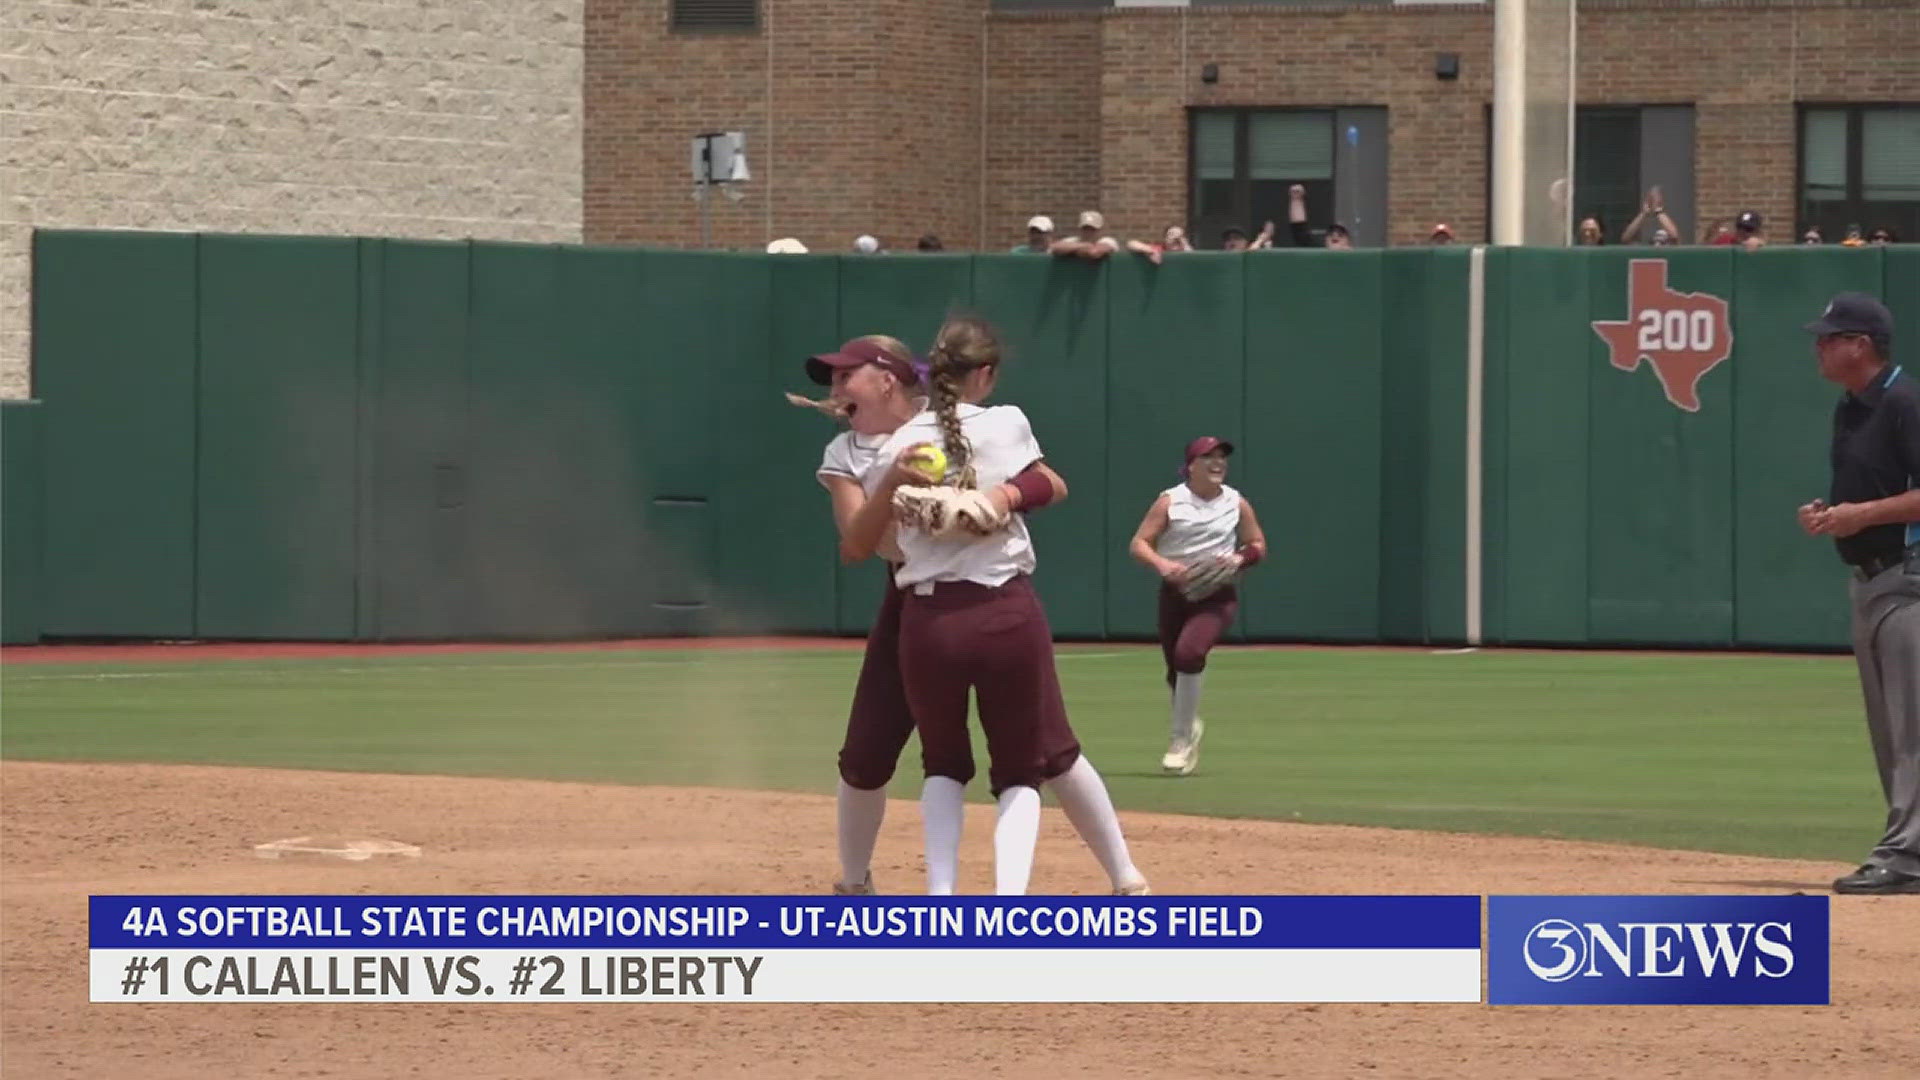 The Calallen Ladycats took the back-to-back title in Austin on Saturday morning.